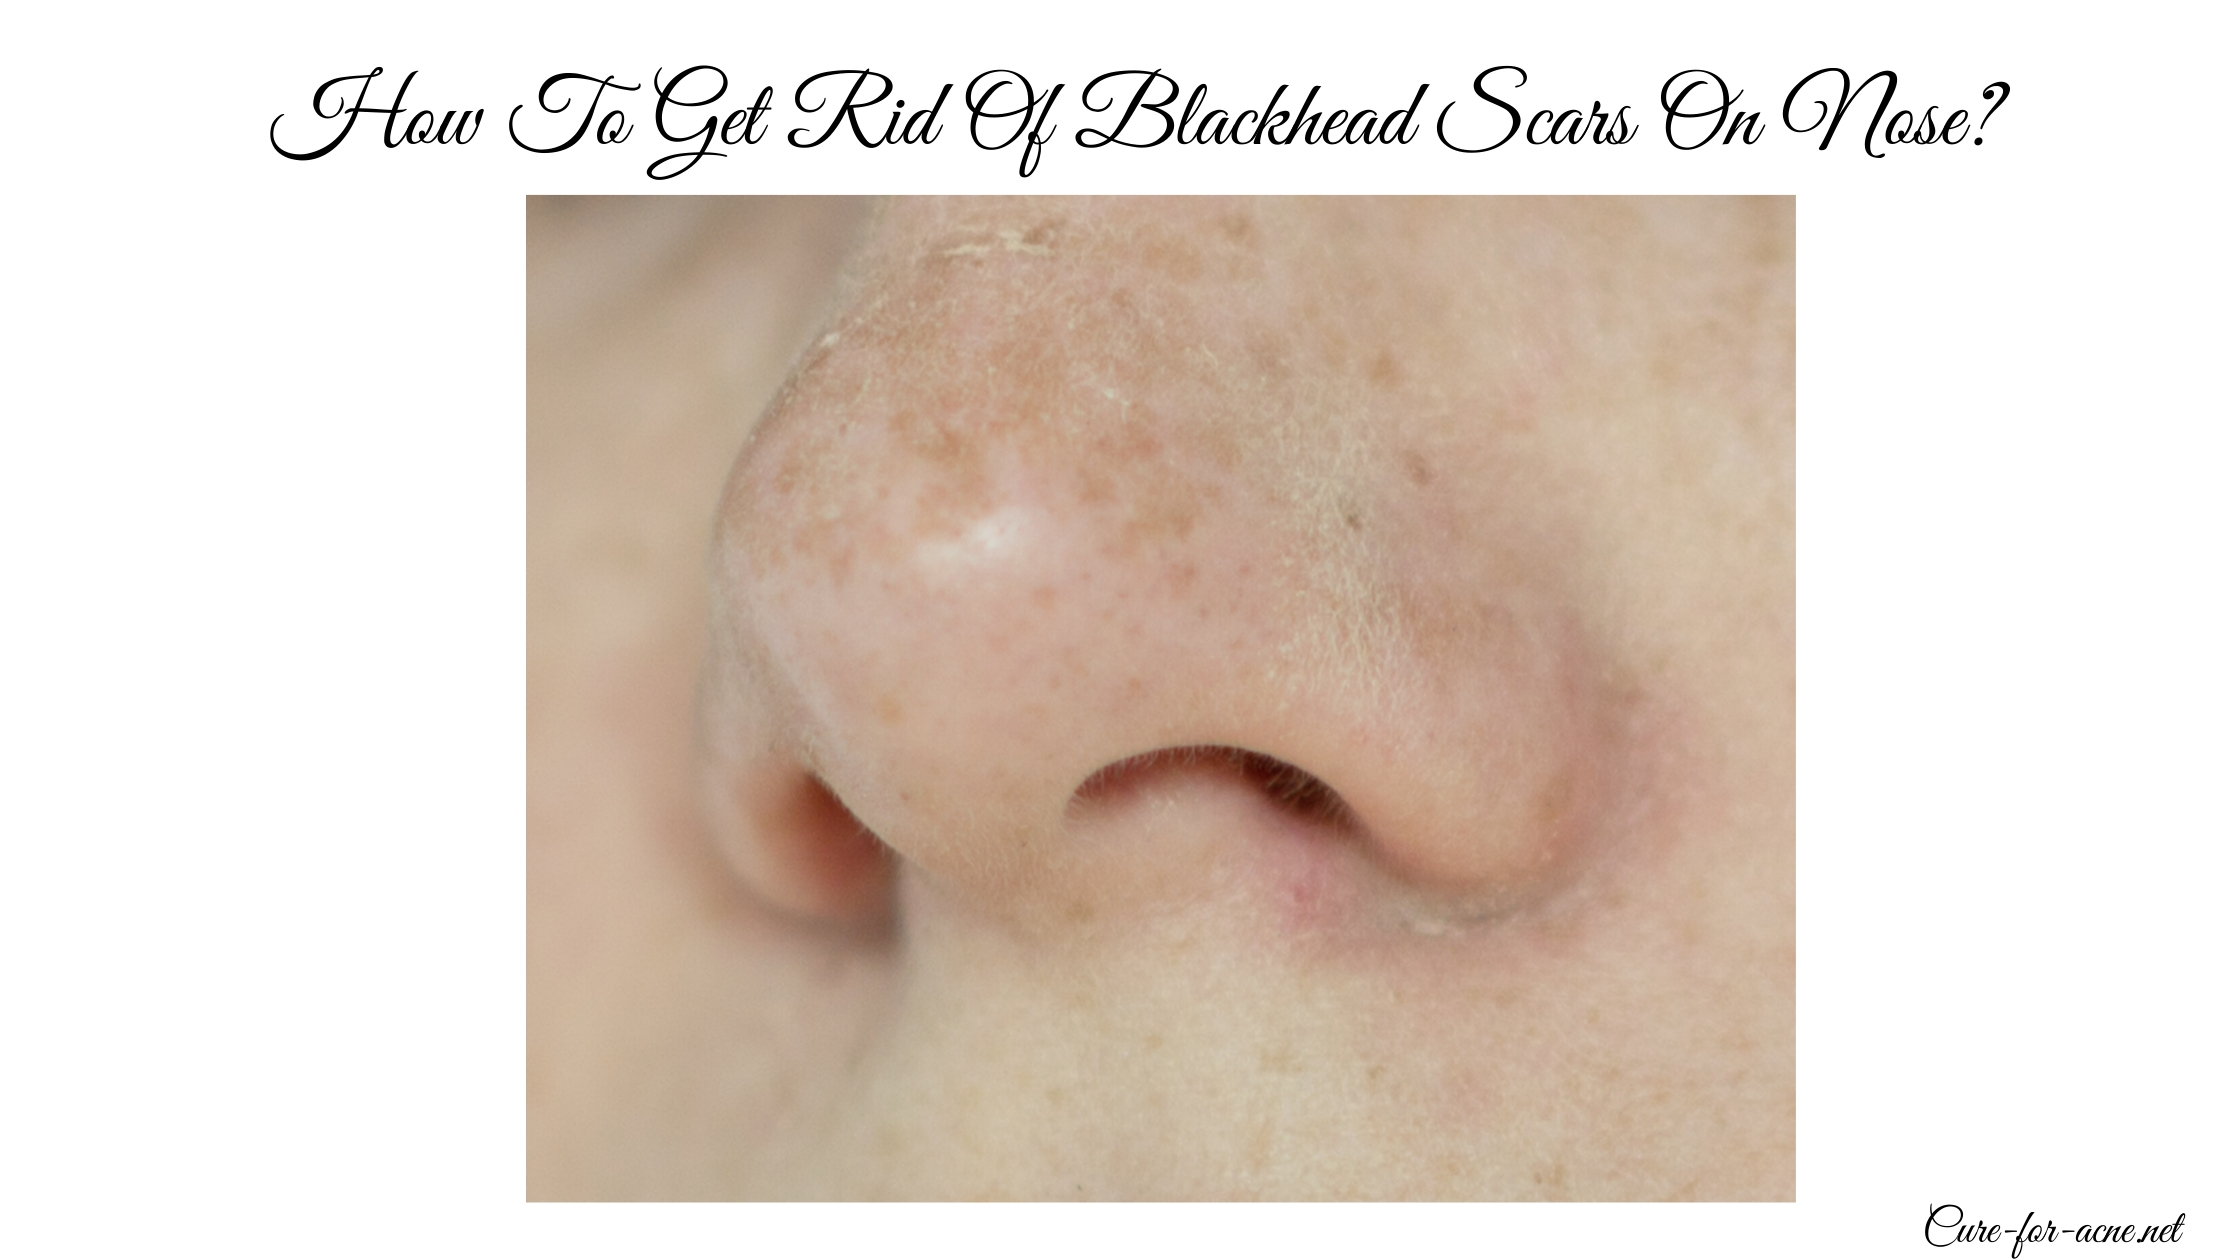 How To Get Rid Of Blackhead Scars On Nose